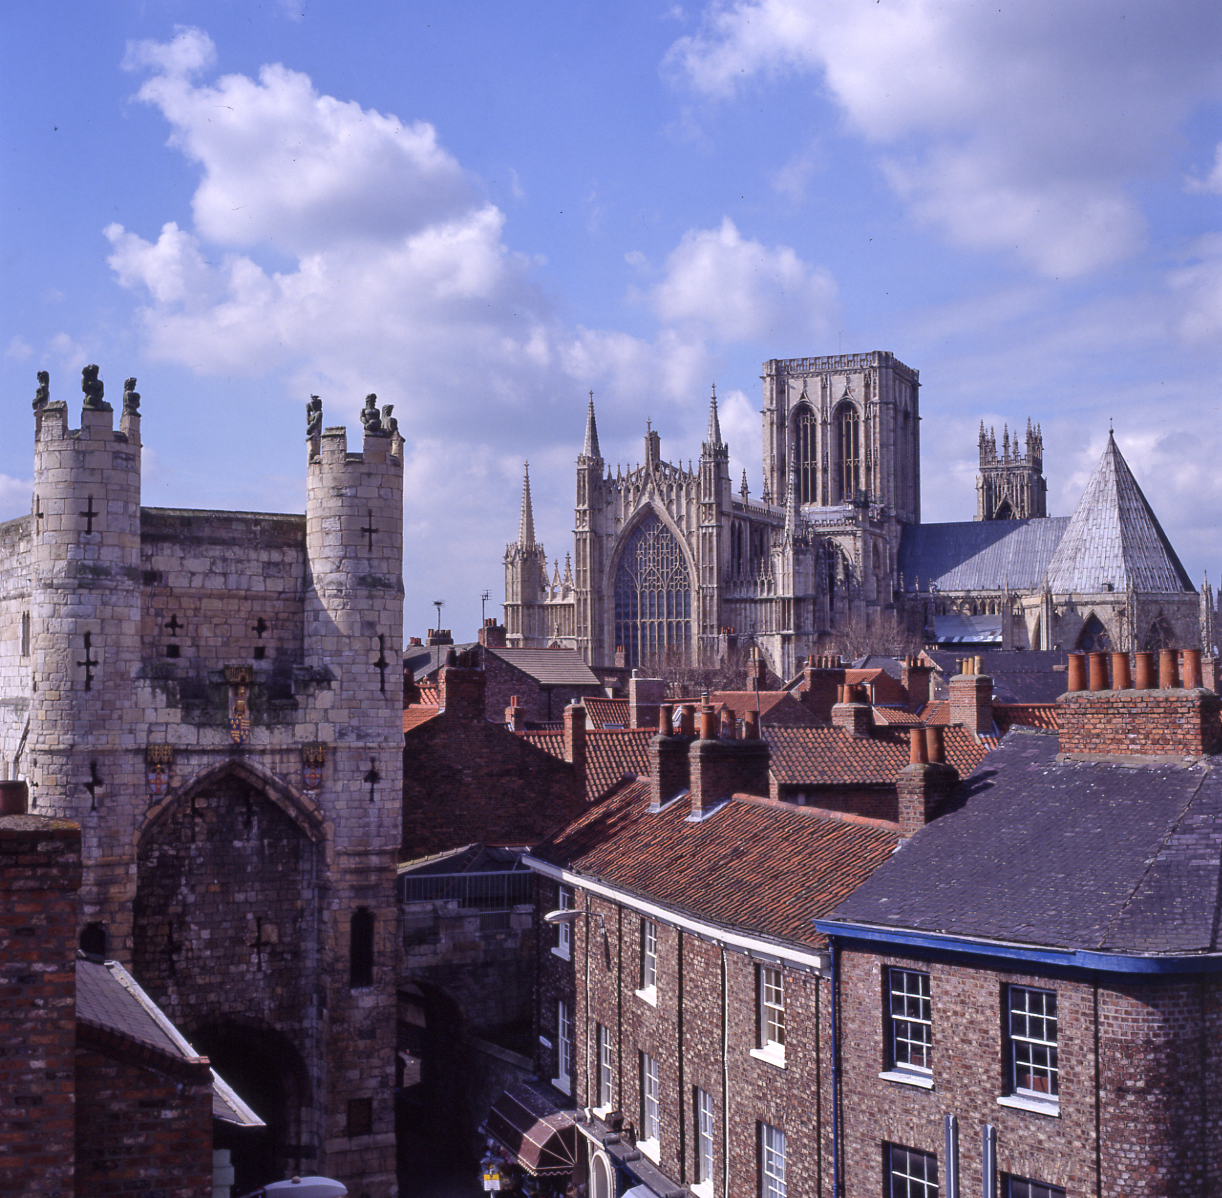 York rooftop view from Monk Bar to the Minster